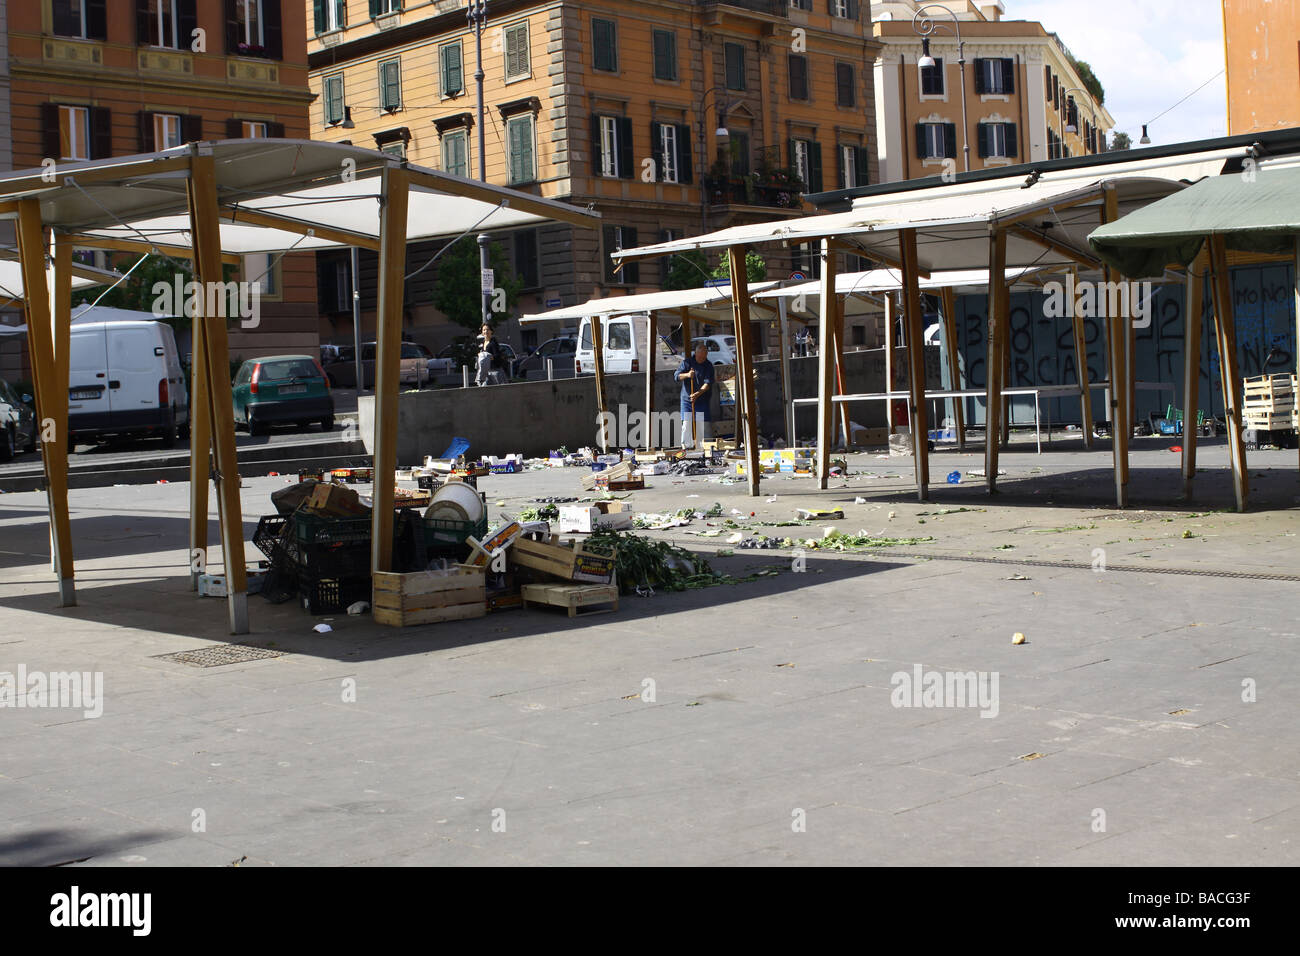 Empty fruit market at closing time, in Piazza S Cosimato Rome Stock Photo